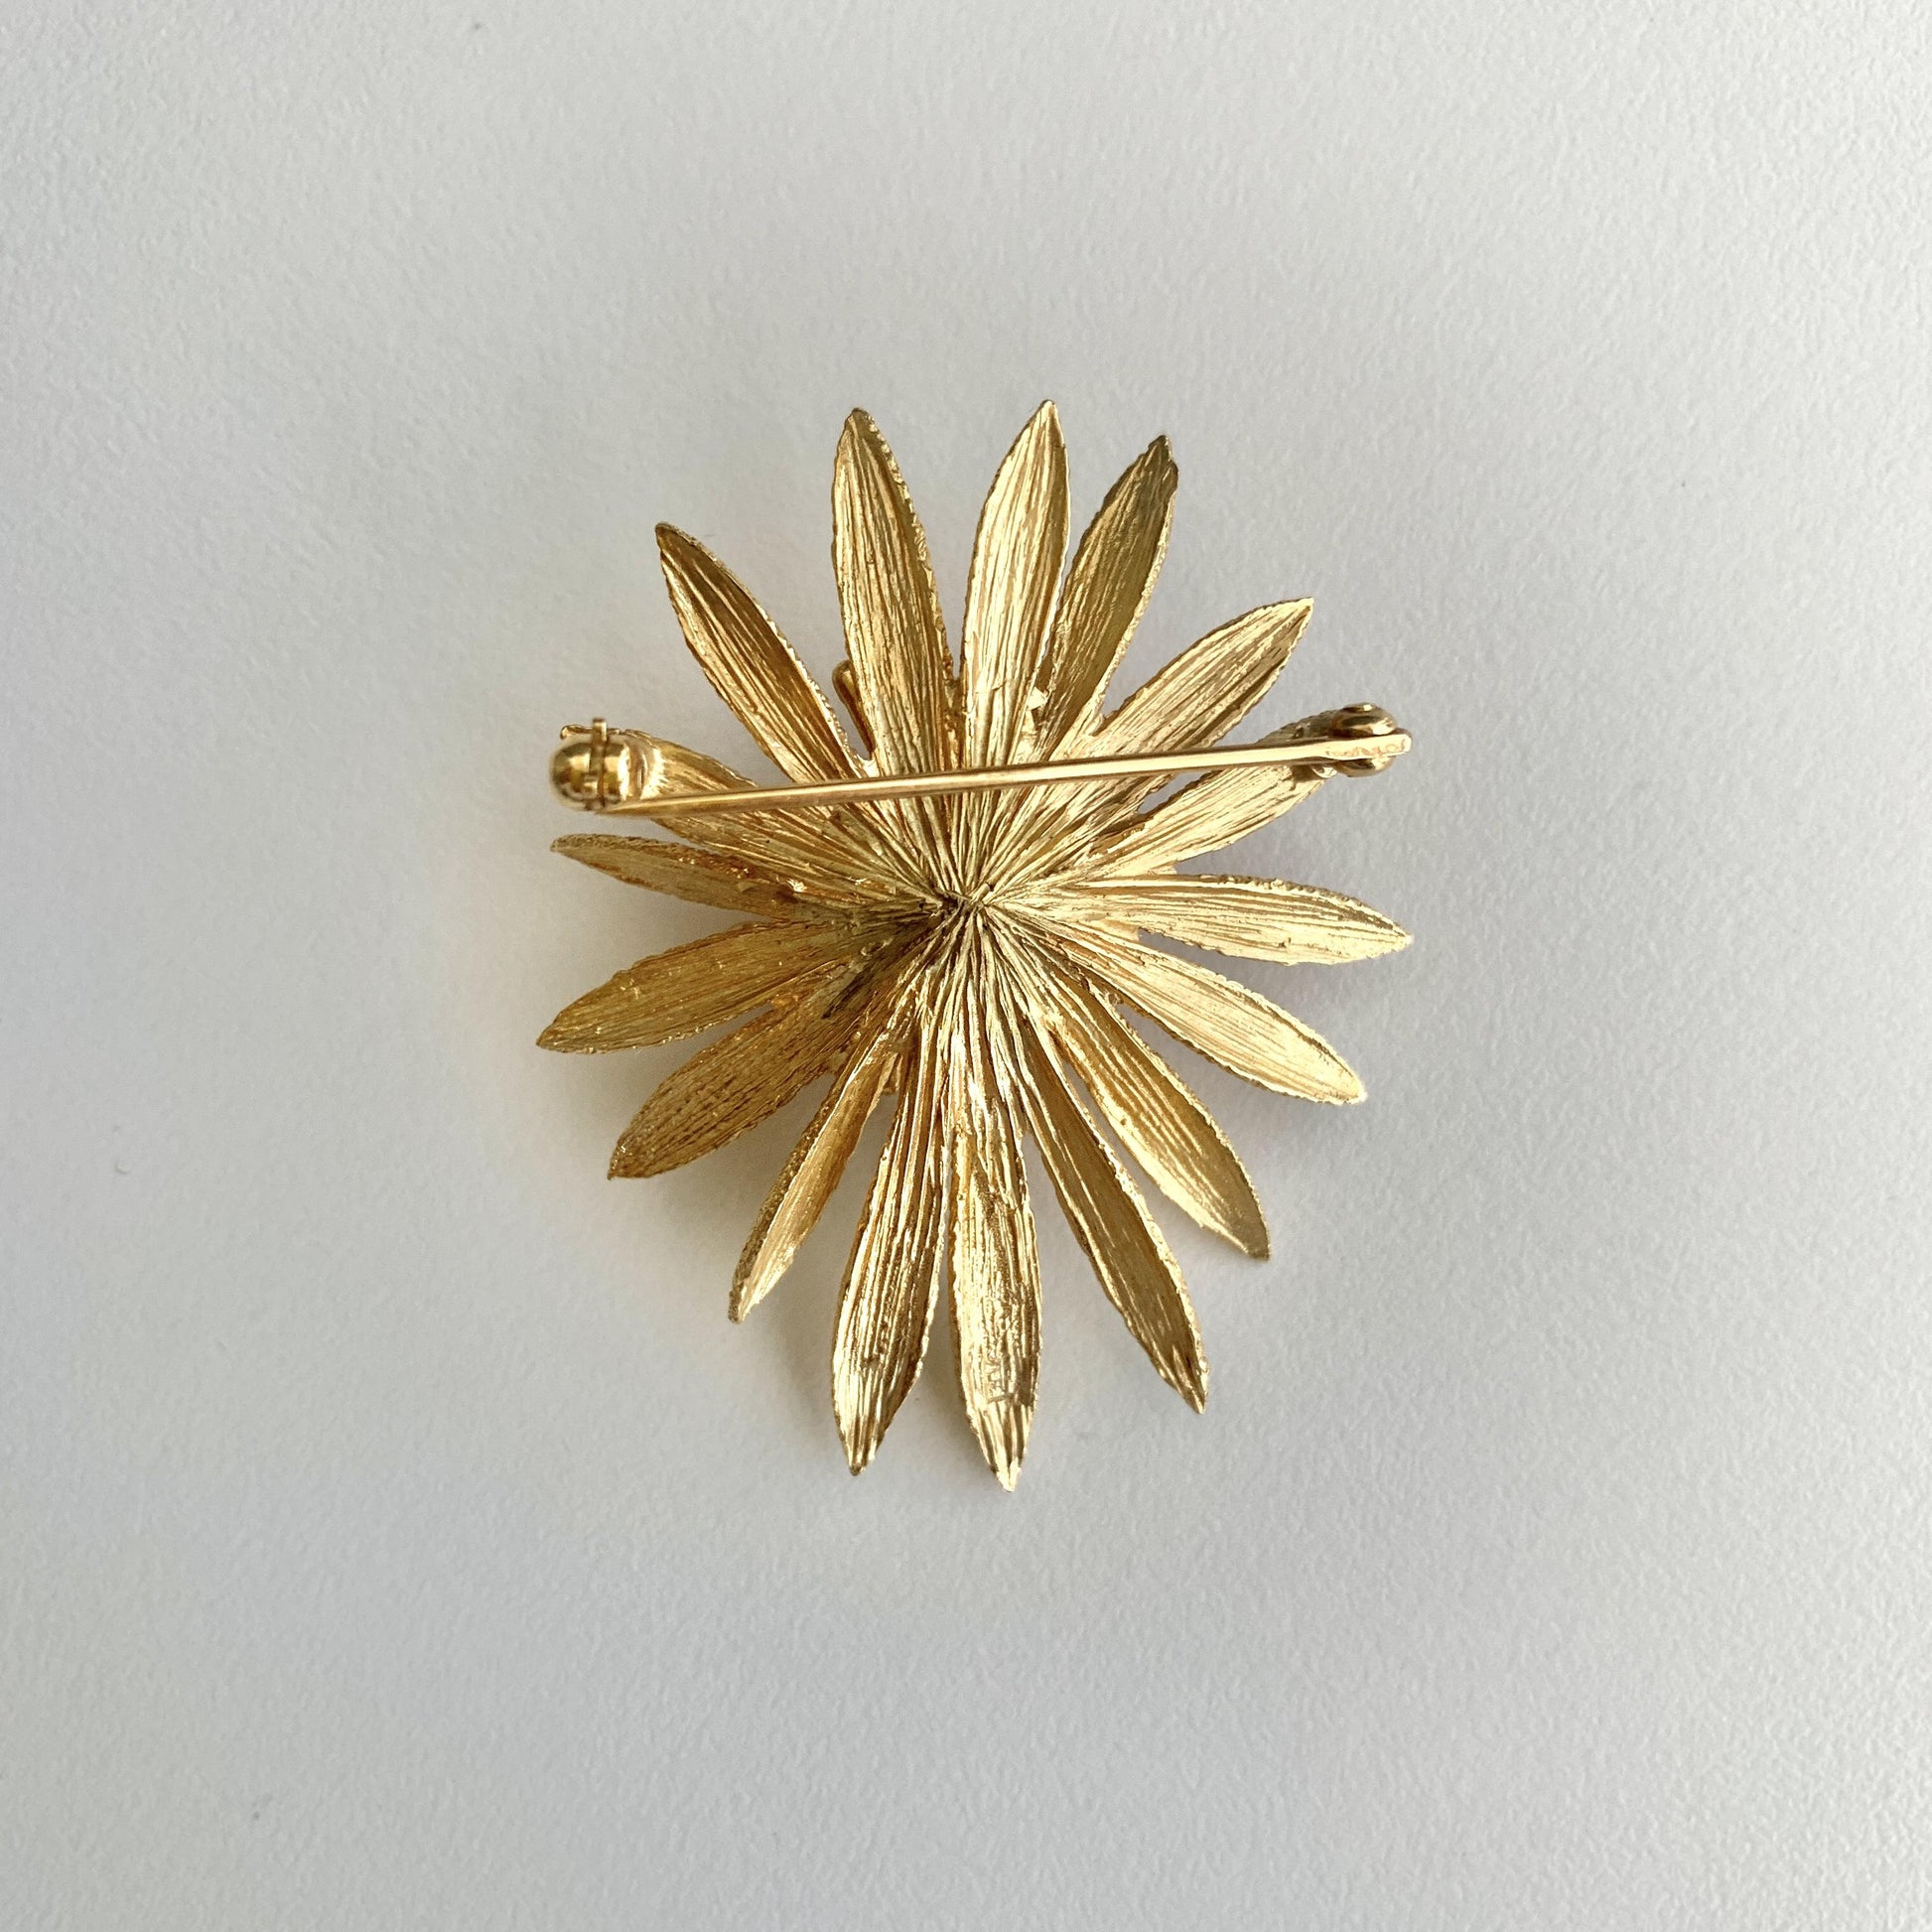 14k Flower Brooch in Yellow Gold With Sapphires 10.46g